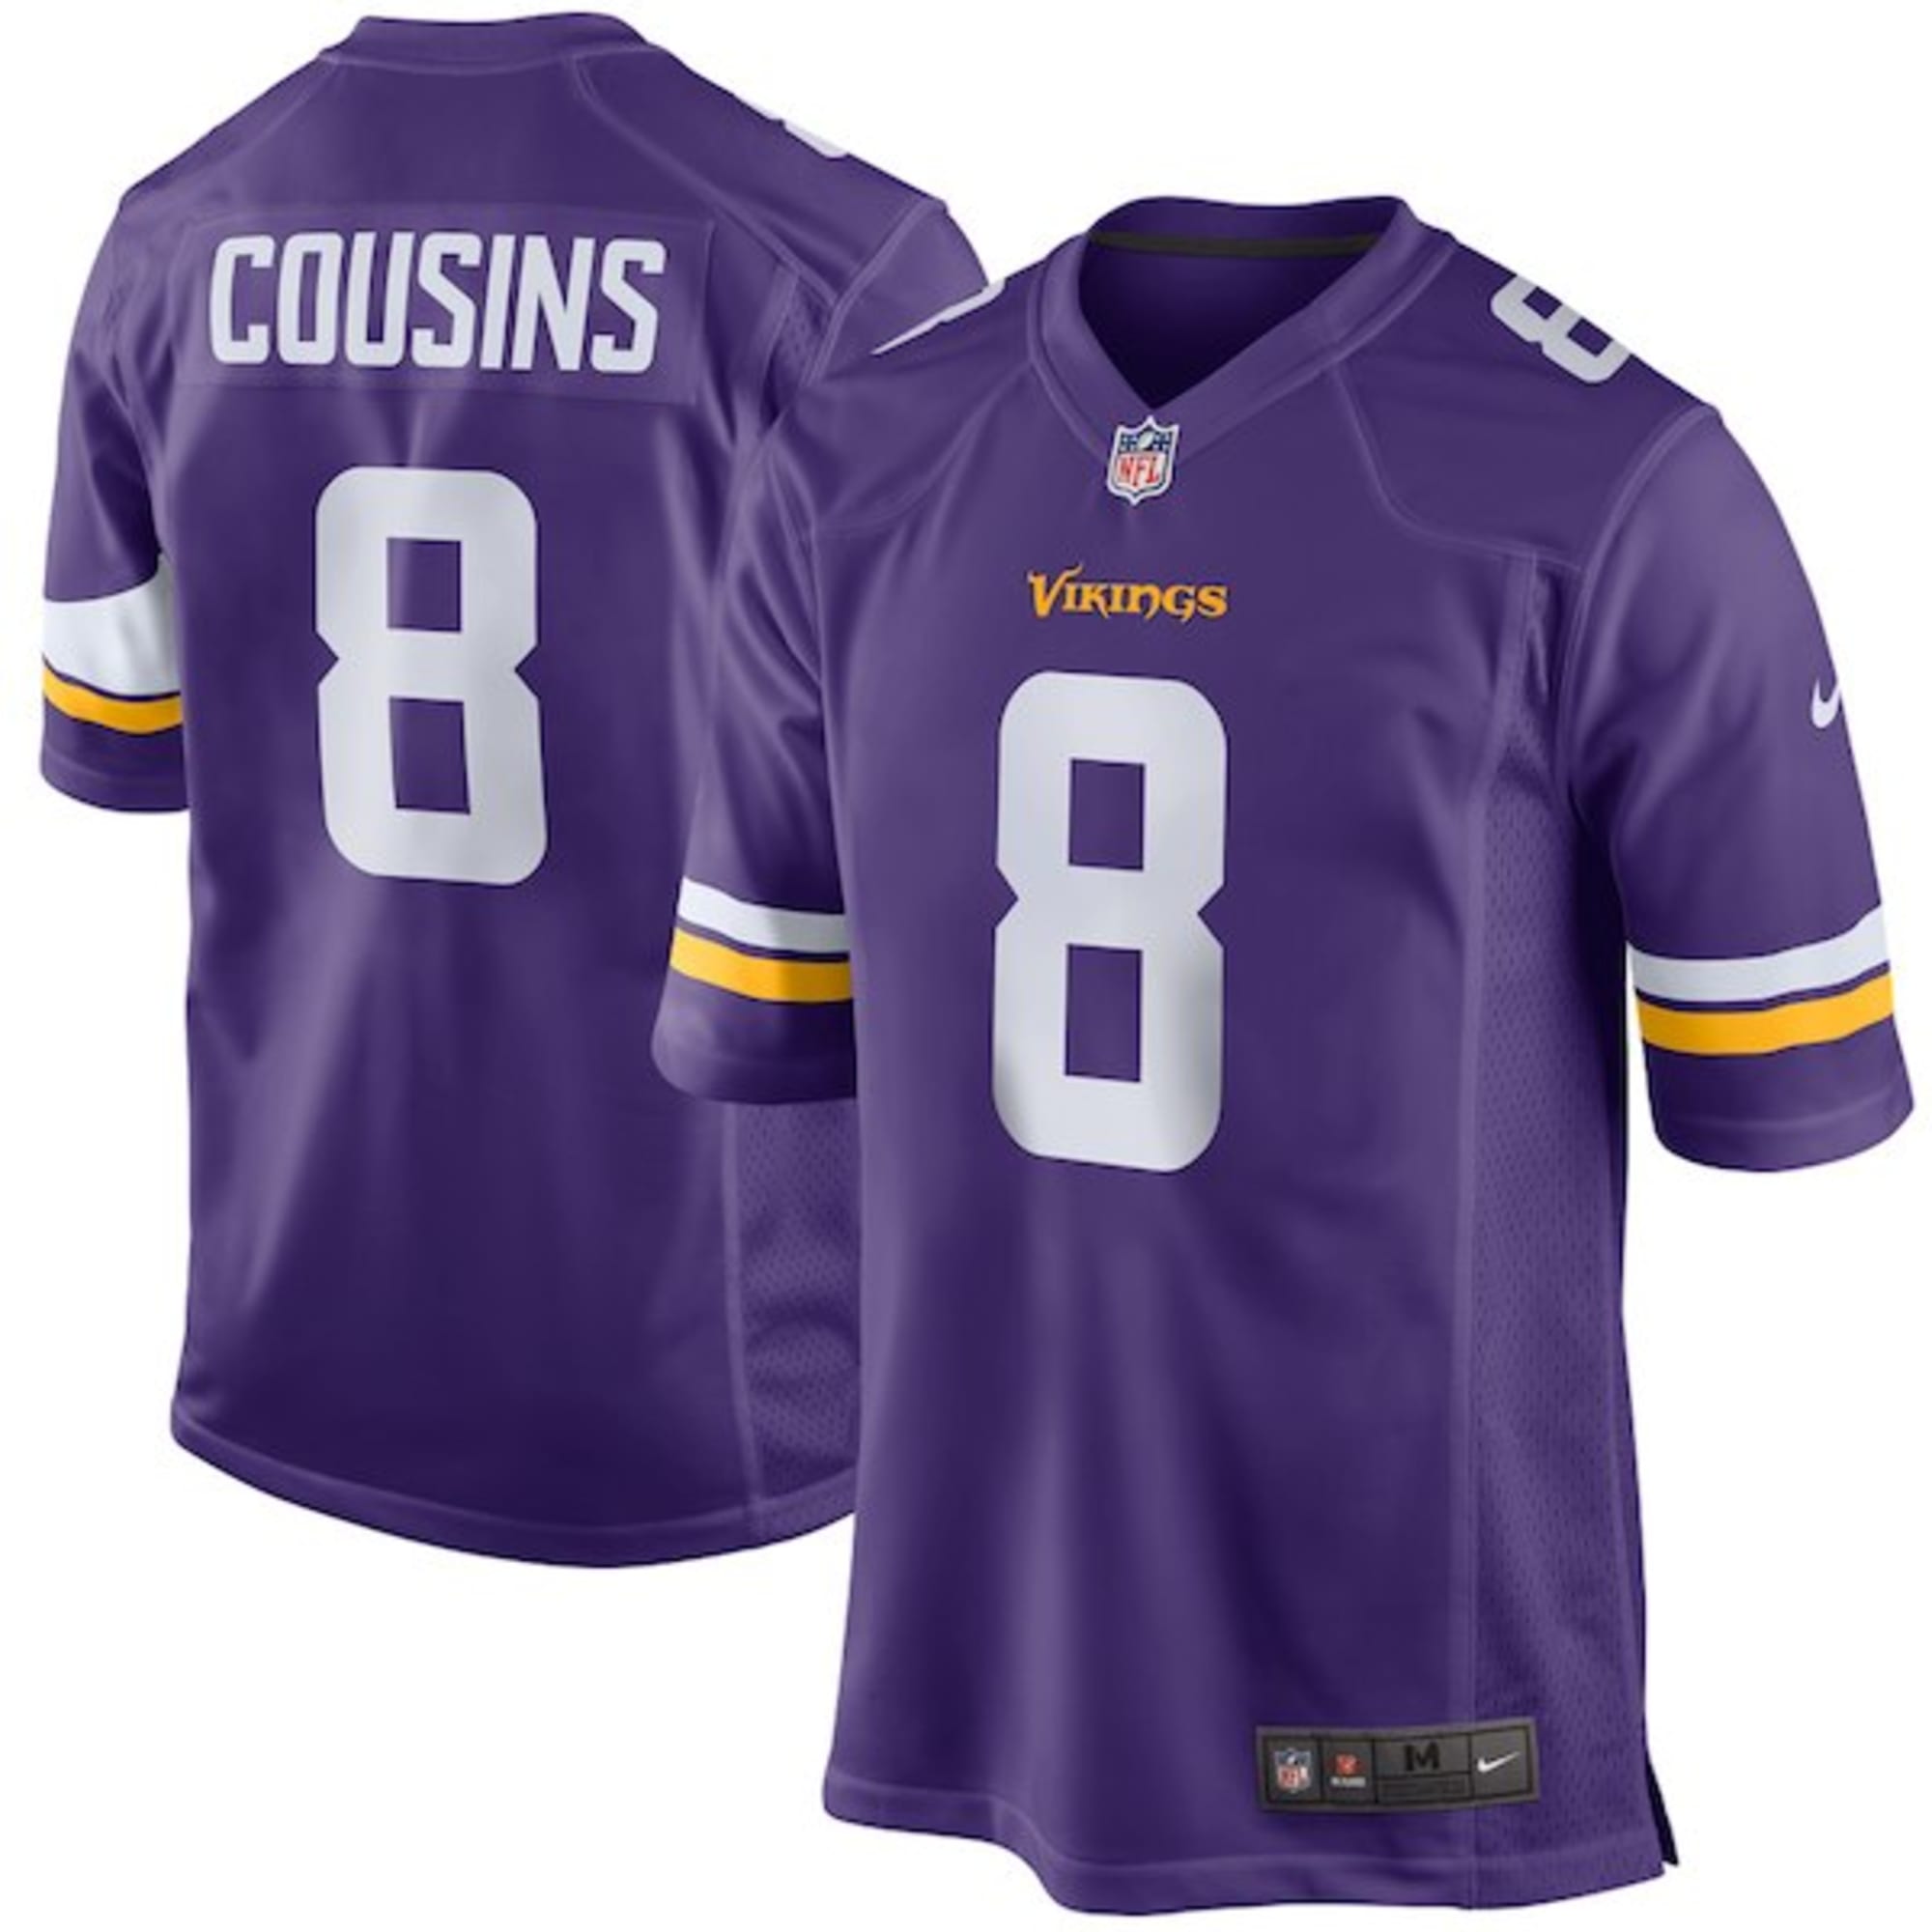 Must-have Minnesota Vikings items for 